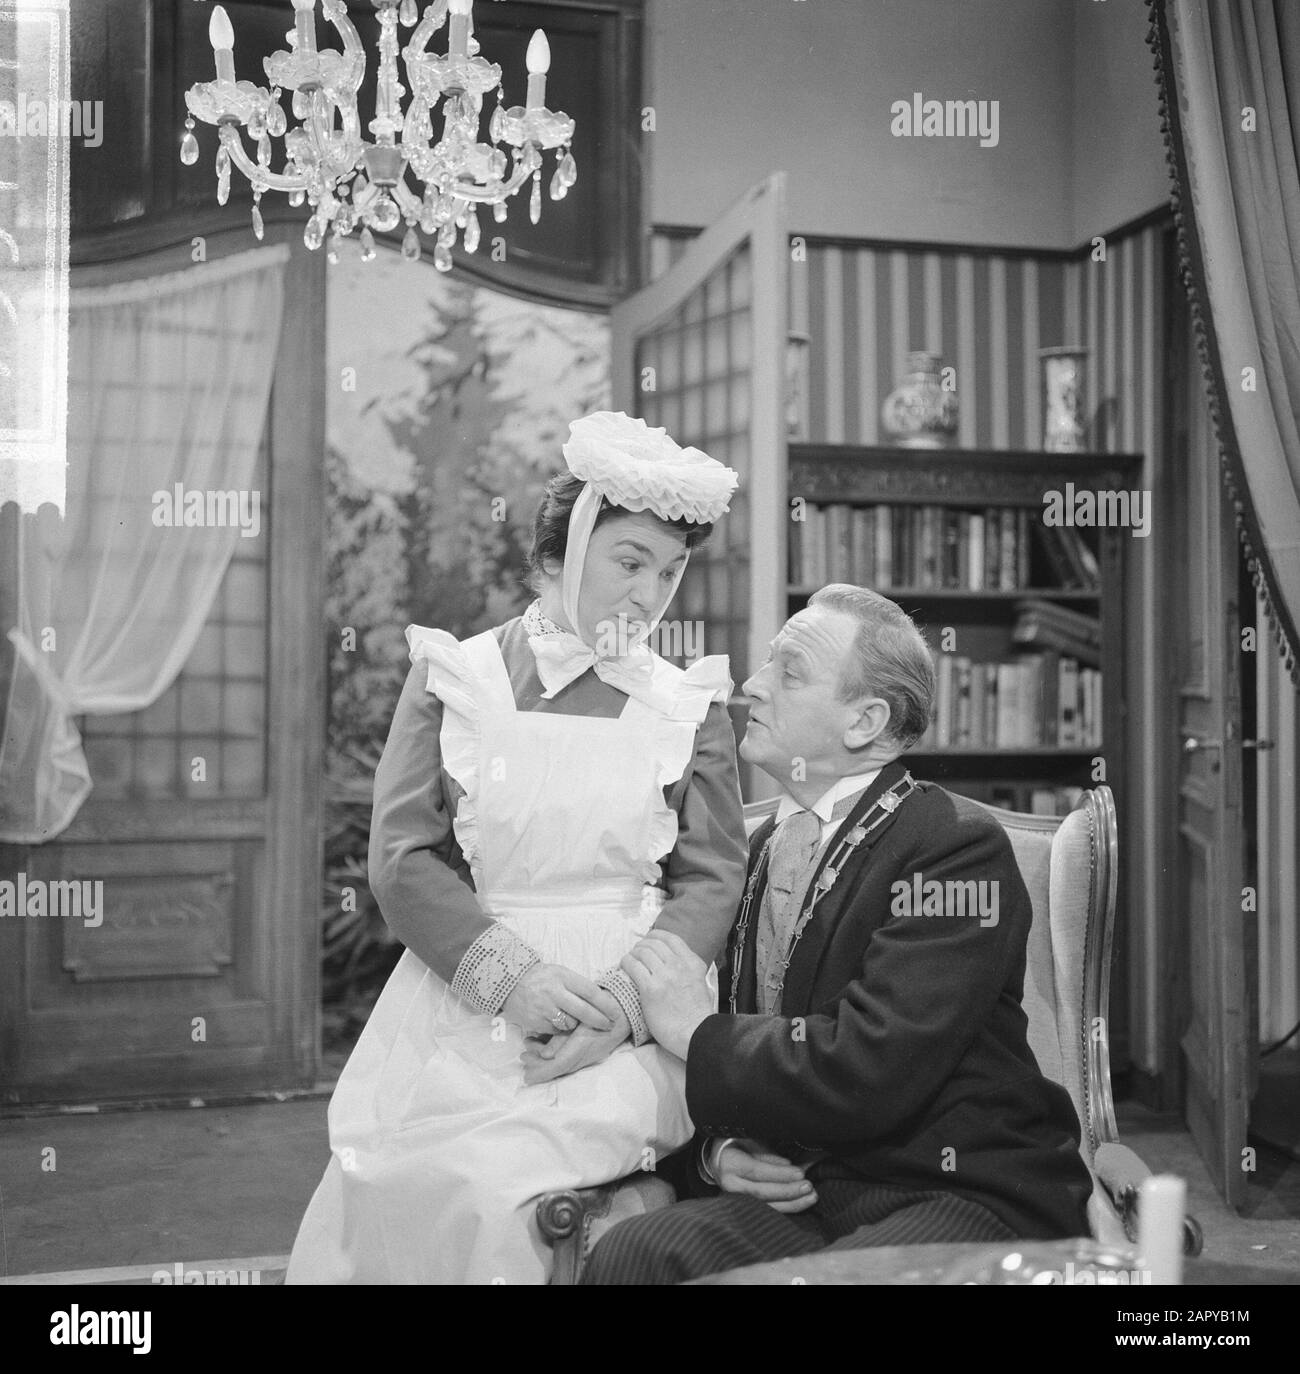 Swiebertje. NCRV television, Saartje (Jetty Cantor) and mayor (Rien van  Nunen) Date: 21 January 1964 Keywords: programs, televisions Personal name:  Cantor, Jetty, Nunen, Rien van, Saartje Institution name: NCRV Stock Photo  - Alamy